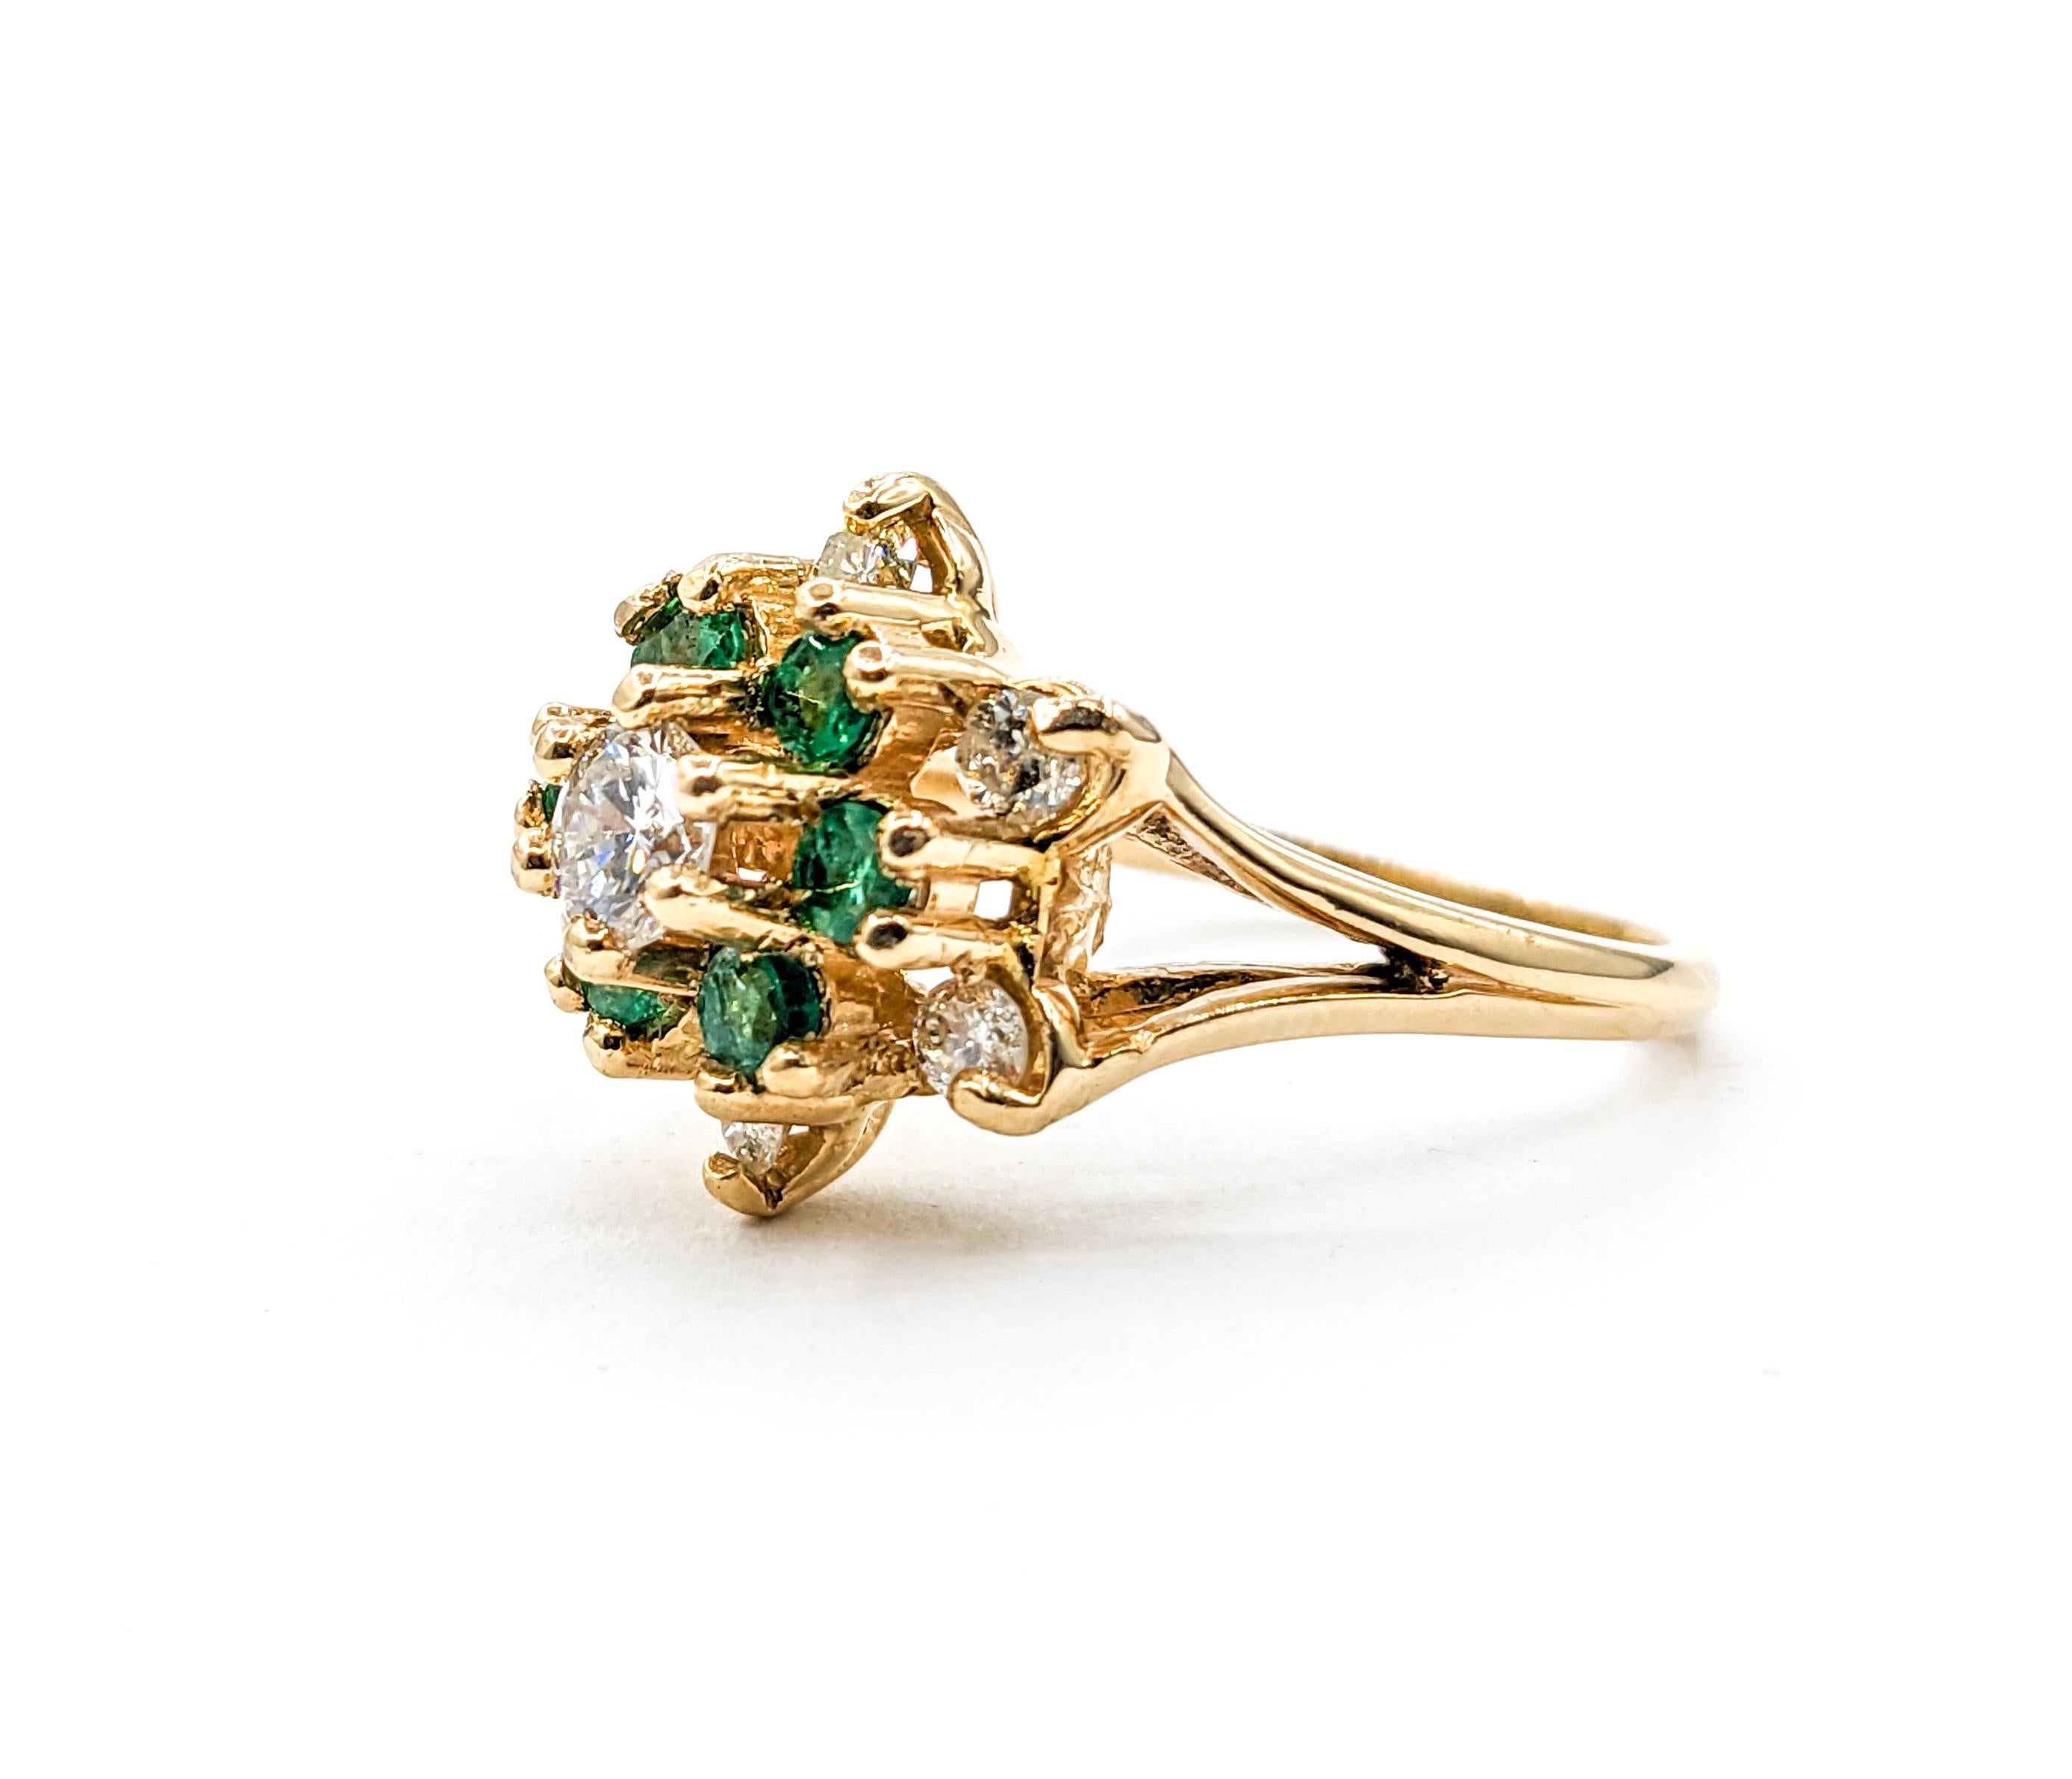 Vintage Emerald & Diamond Star Cluster Ring In Yellow Gold

Discover the charm of this beautiful Emerald and Diamond Cluster Ring, exquisitely crafted in 14k yellow gold. This ring boasts a beautiful floral design, set with .40ctw of vibrant